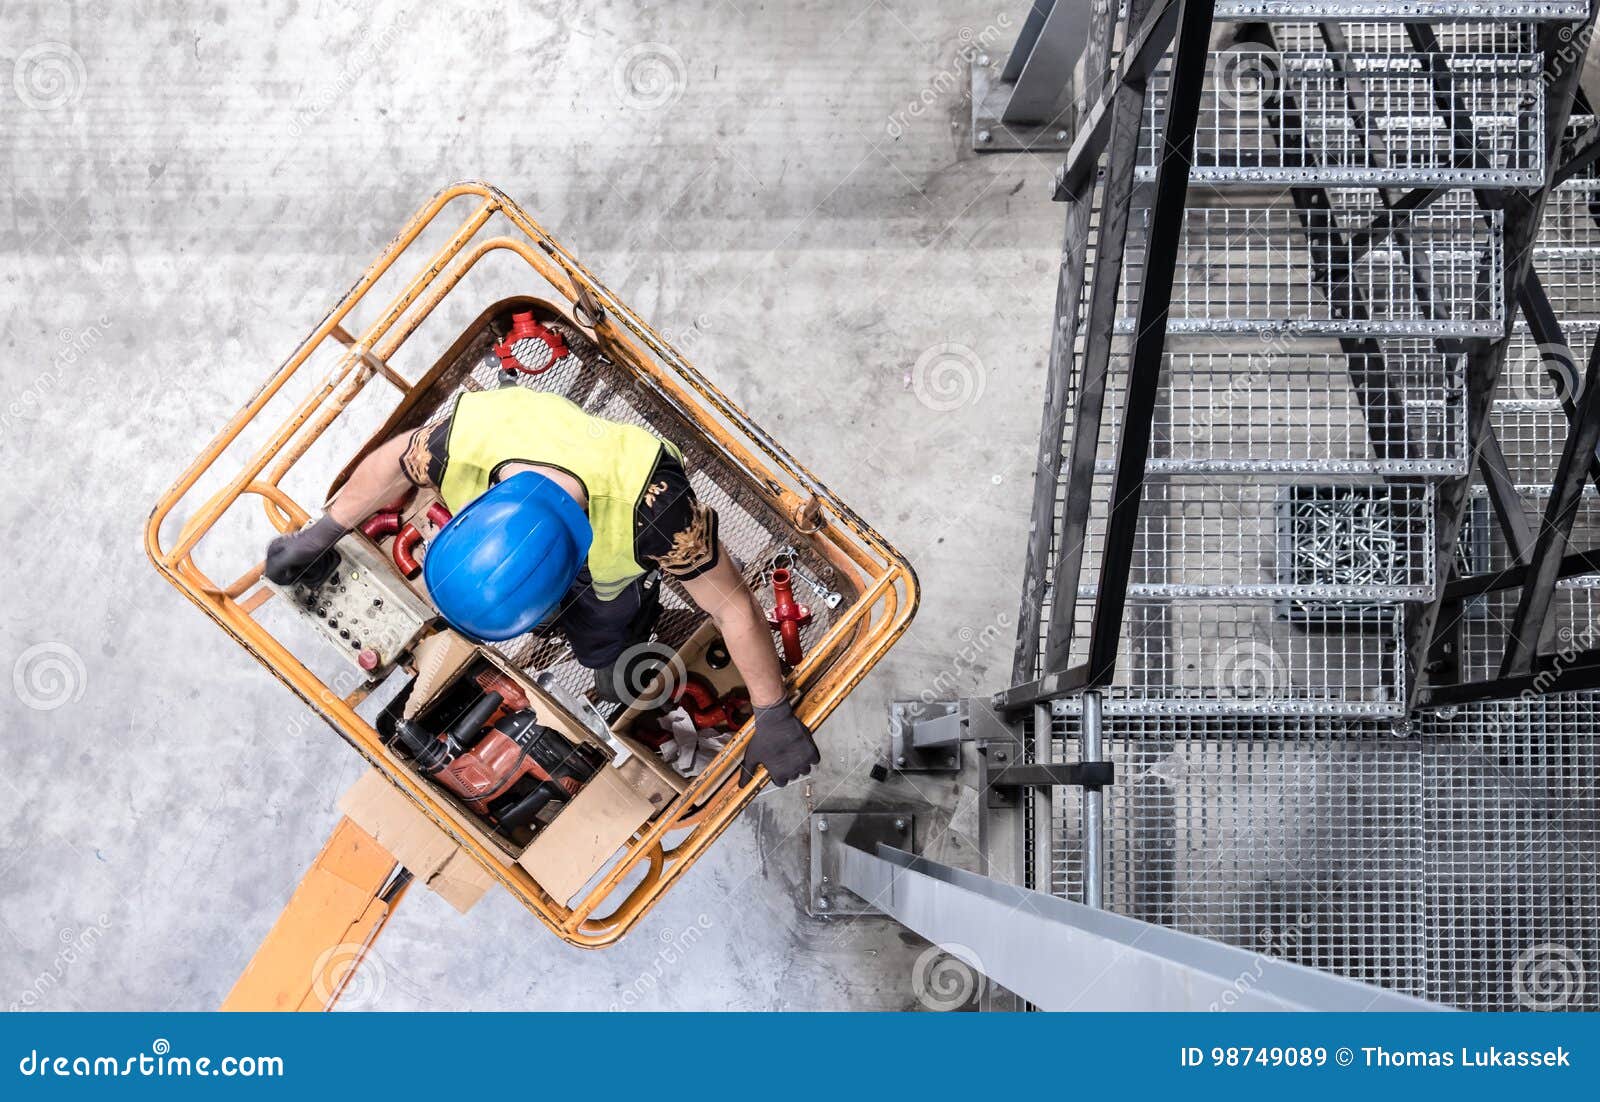 aerial of a worker on a cherry picker